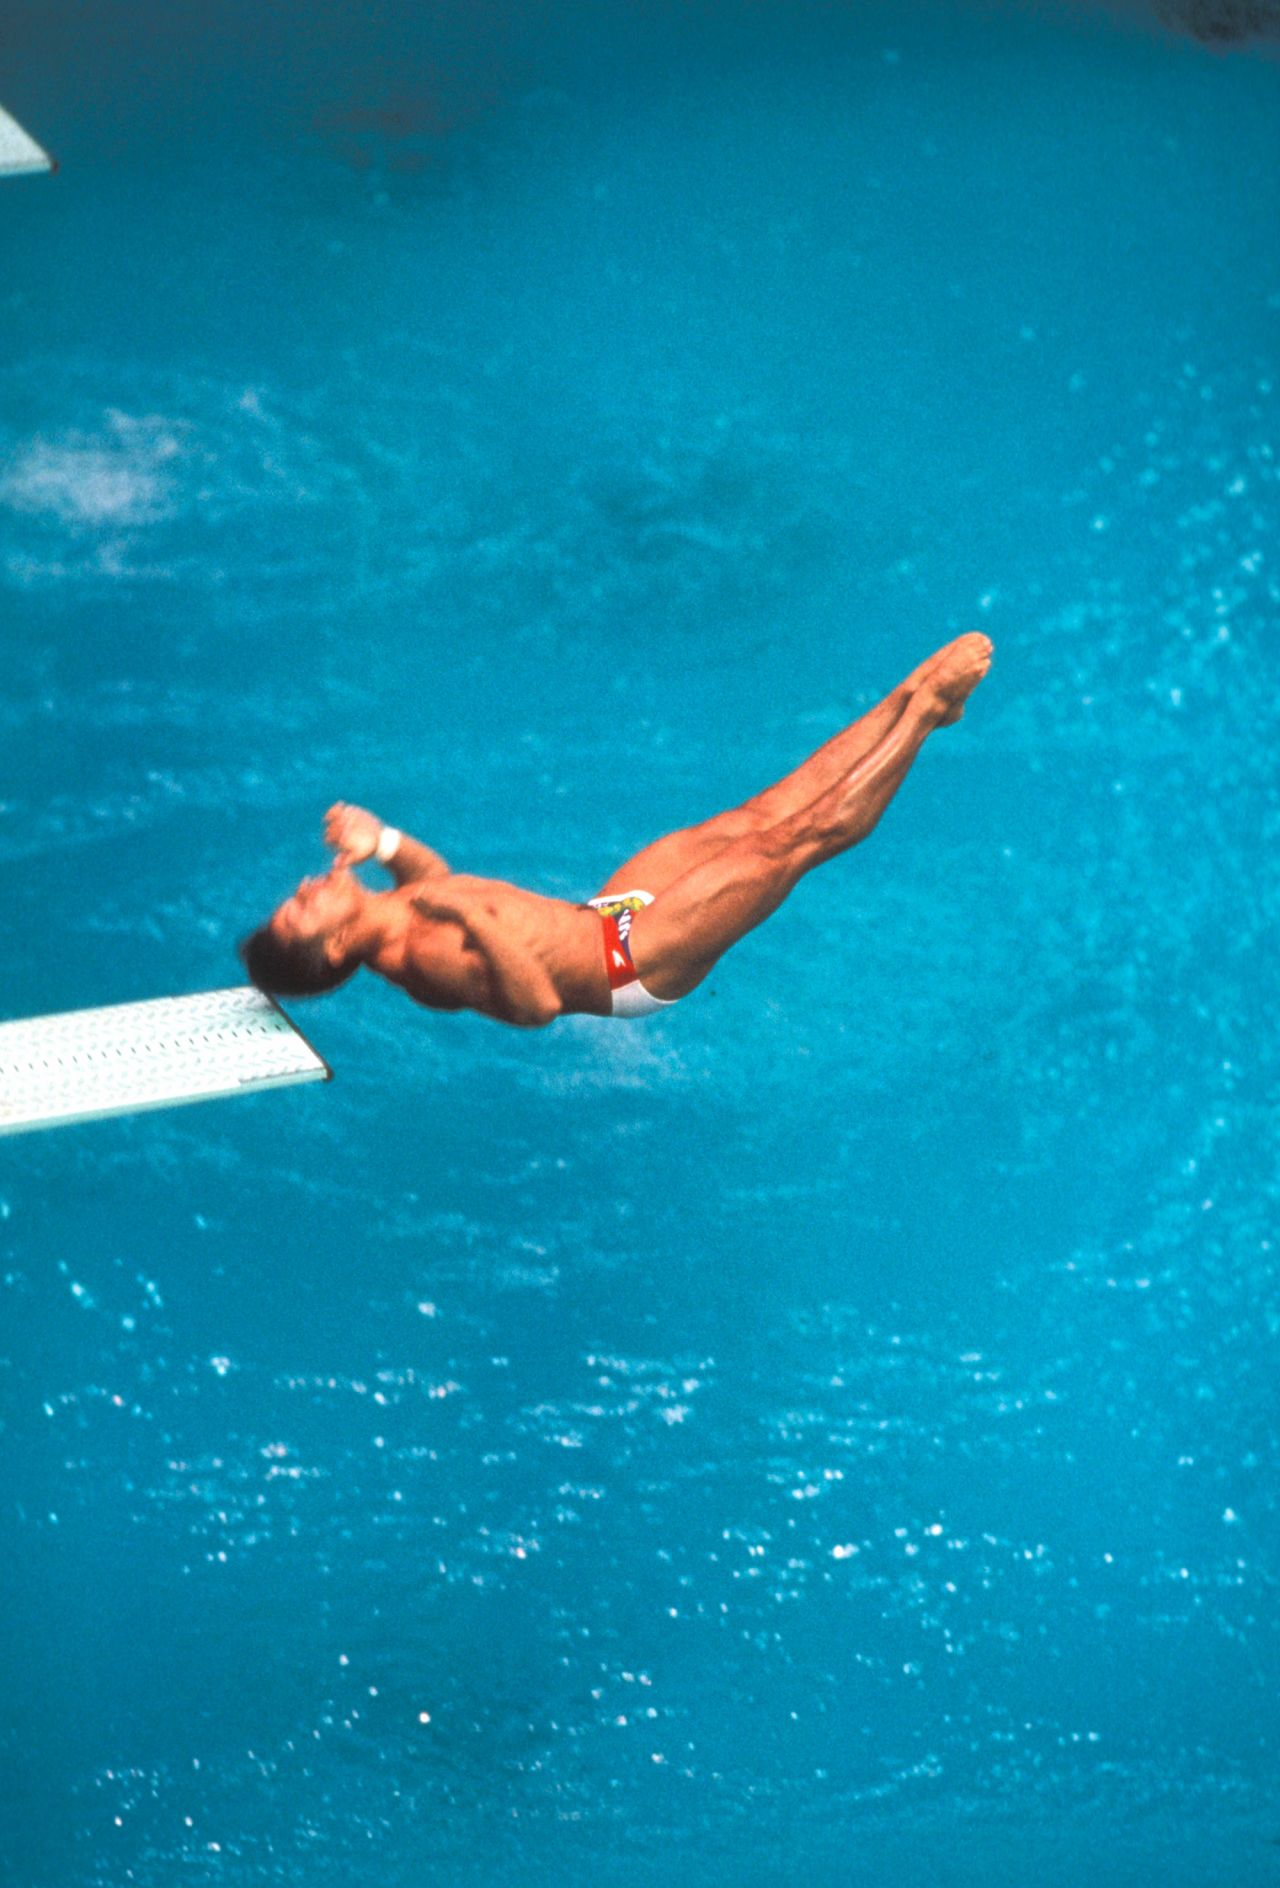 It was the thud heard 'round the world. At the 1988 Olympics in Seoul, South Korea, all eyes were on American diver Greg Louganis, who had been one of the stars of the 1984 Olympics in Los Angeles. He had wowed viewers with his strength and grace, and as he stepped up to the diving board four years later, nothing less was expected. Instead, he hit his head on the board in the middle of a complicated dive. He would go on to win the event's gold medal. But for a moment, America held its collective breath.